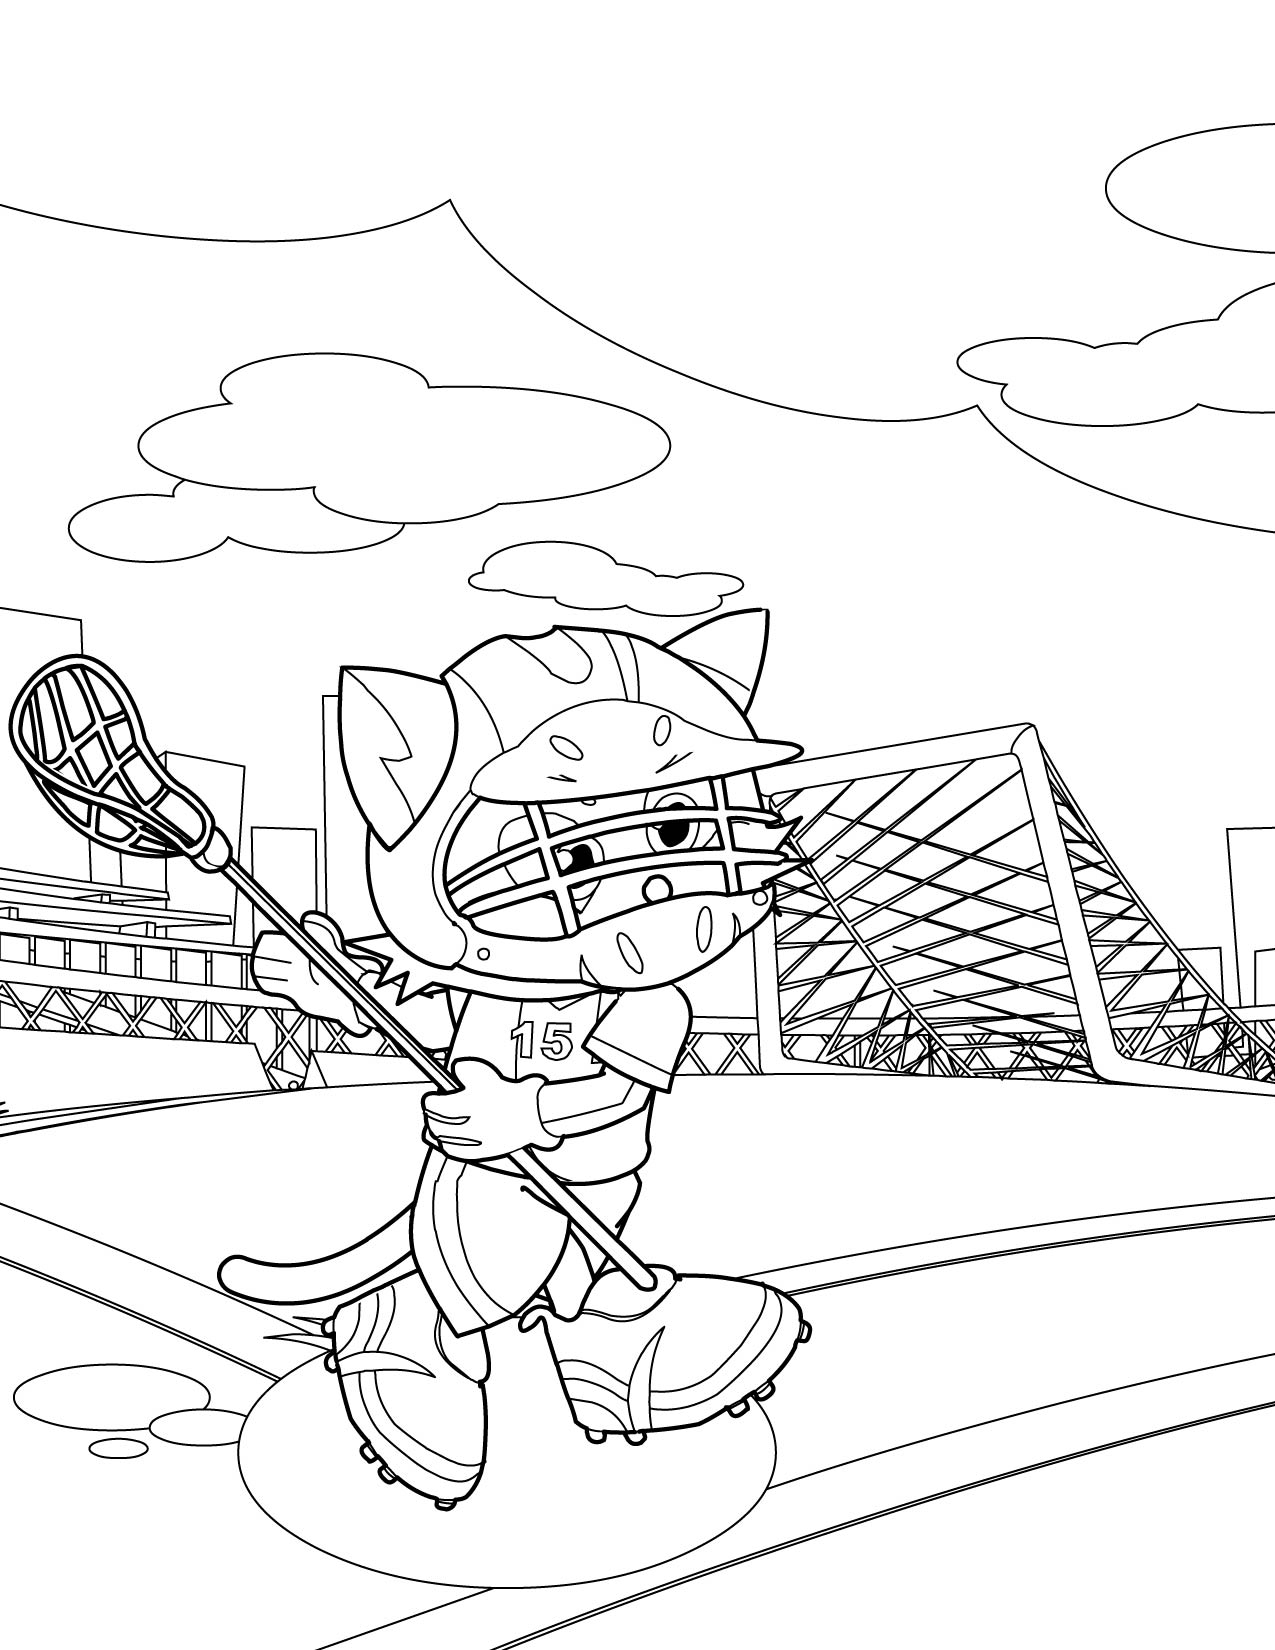 lacrosse-coloring-pages-at-getcolorings-free-printable-colorings-pages-to-print-and-color